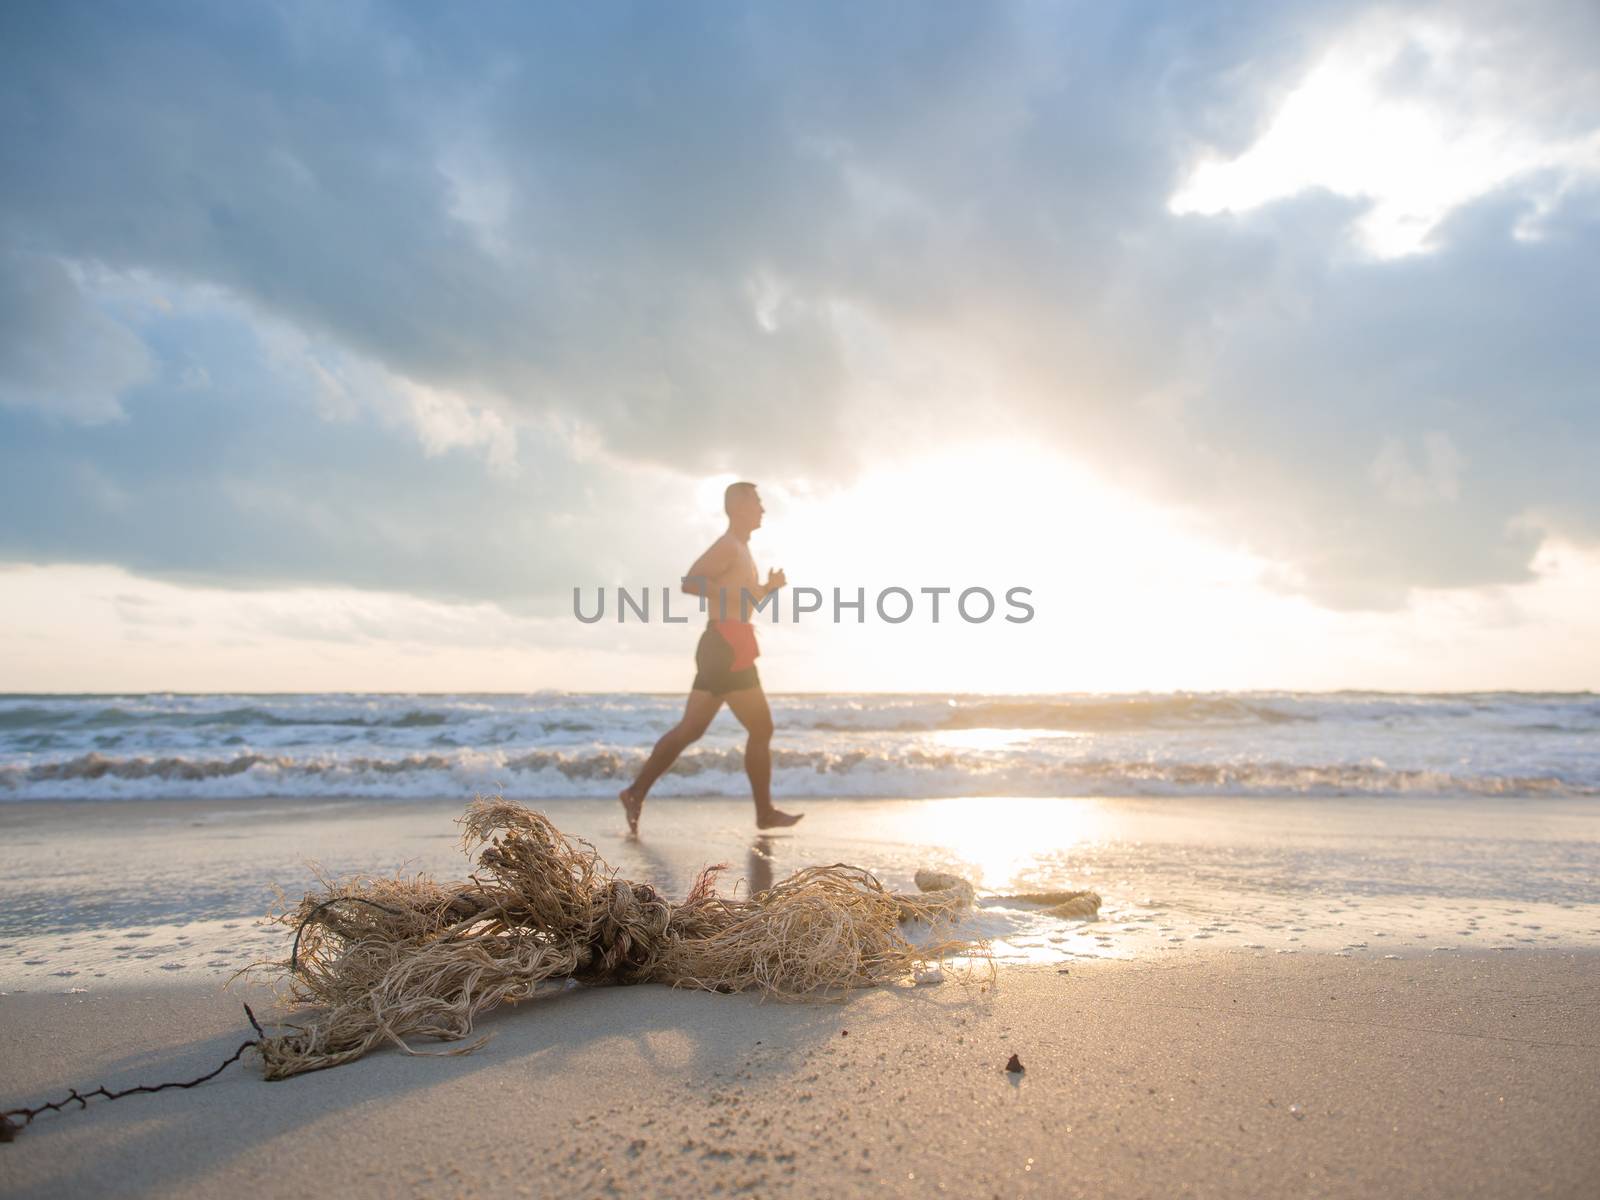 Rope on the beach with man running on background in Koh Samui island, Thailand.